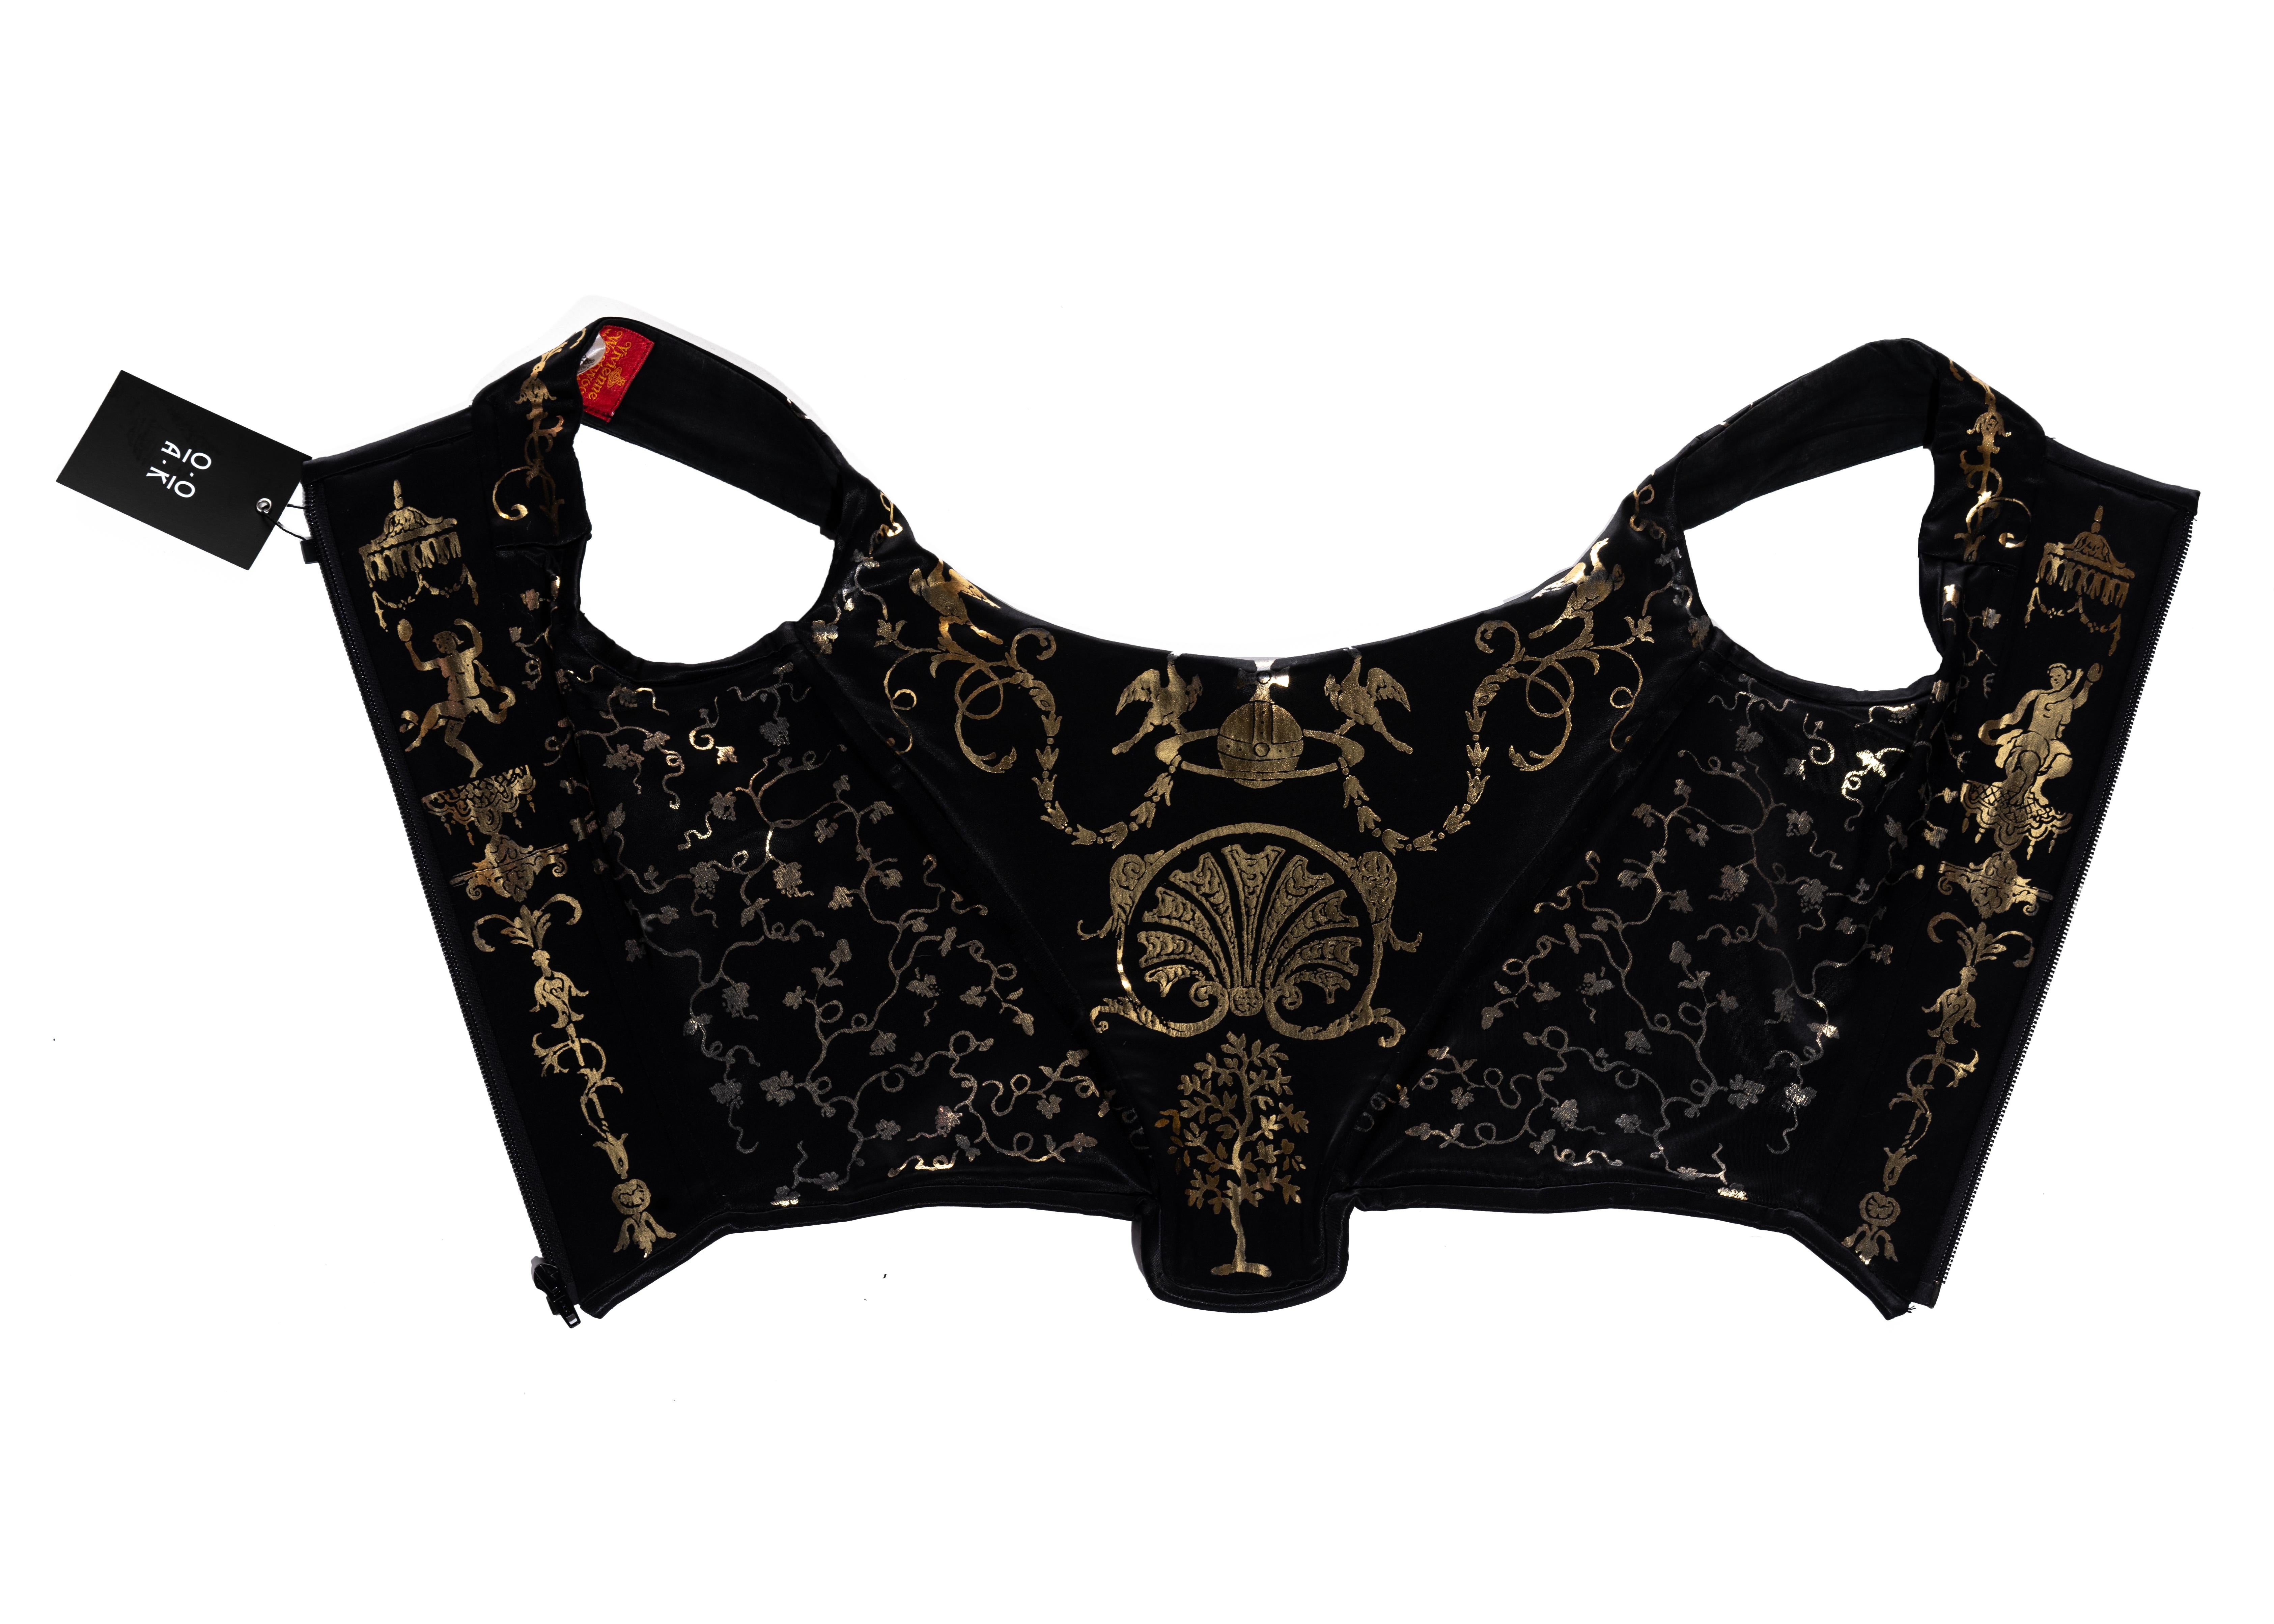 Black Vivienne Westwood black satin corset with metallic gold pattern, ss 1992 For Sale